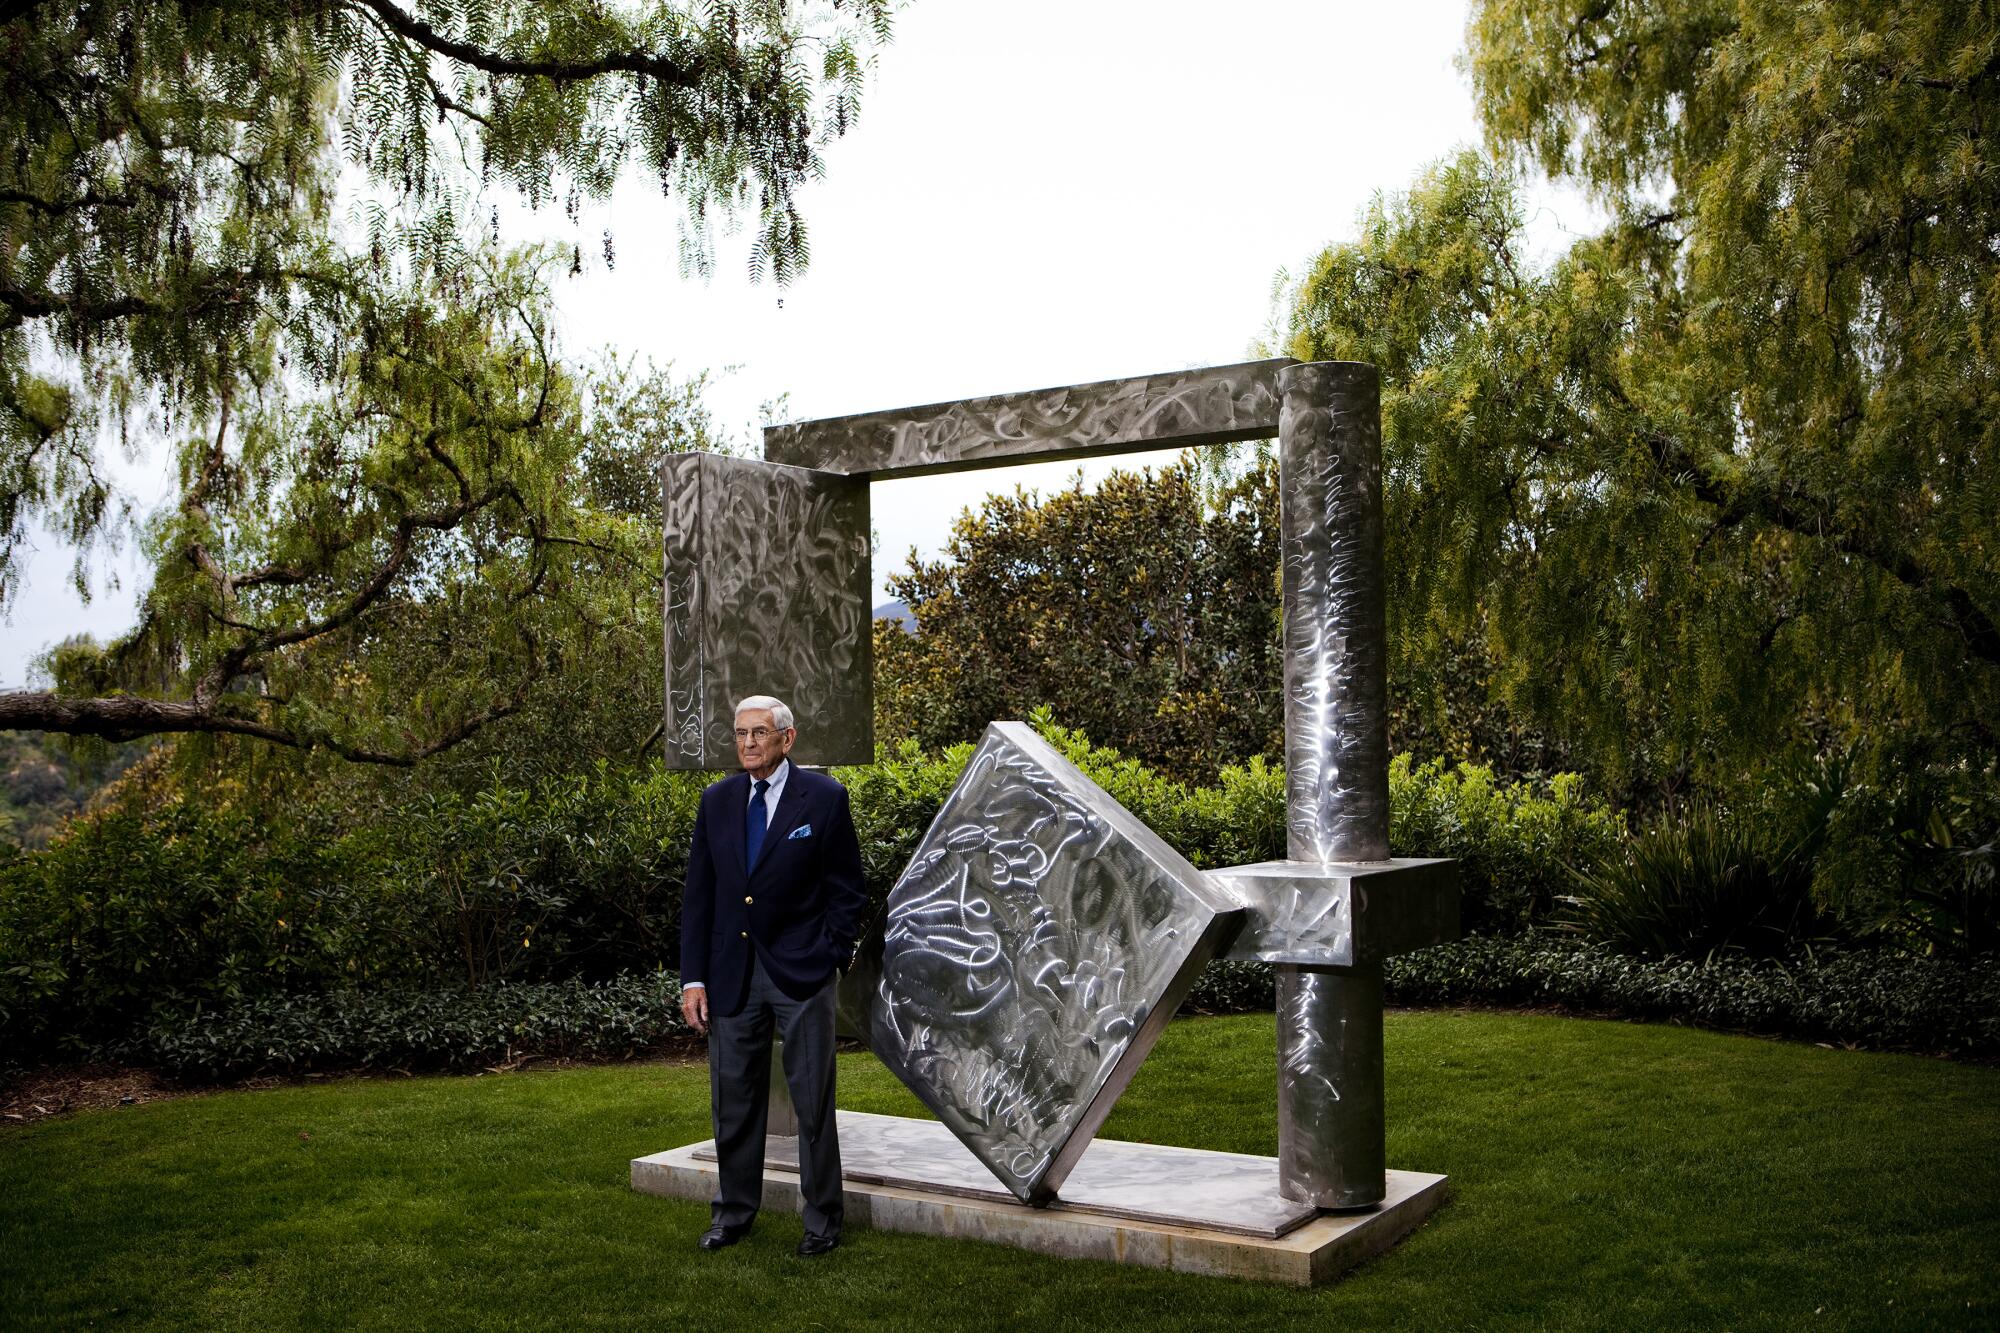 Eli Broad stands before a metallic sculpture, against a background of shrubs and trees.